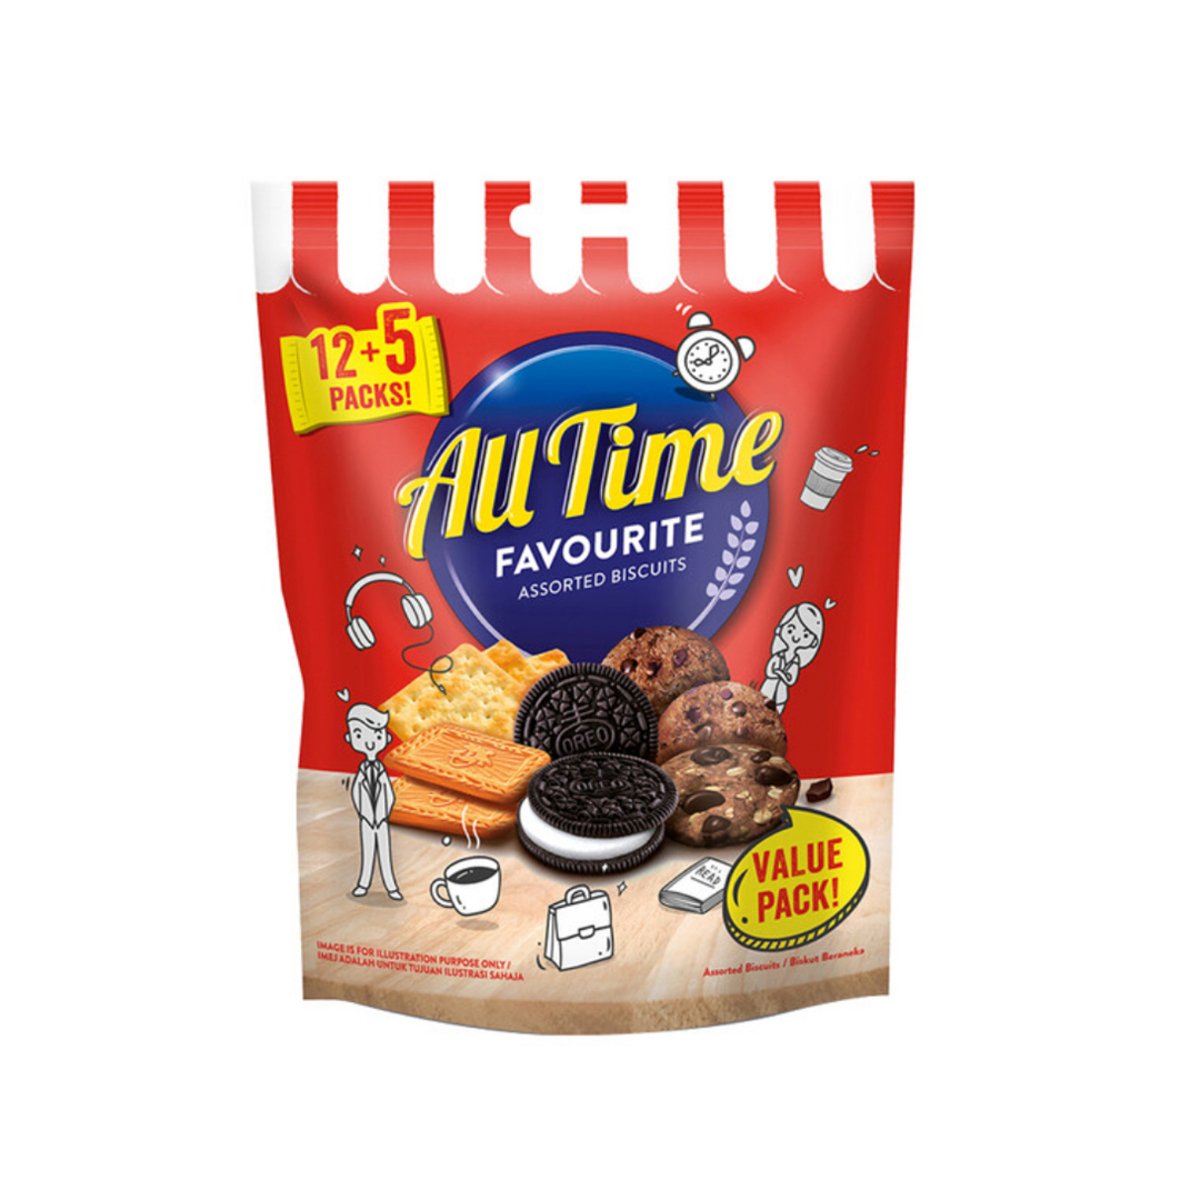 All Time Favourite Assorted Biscuits 499g